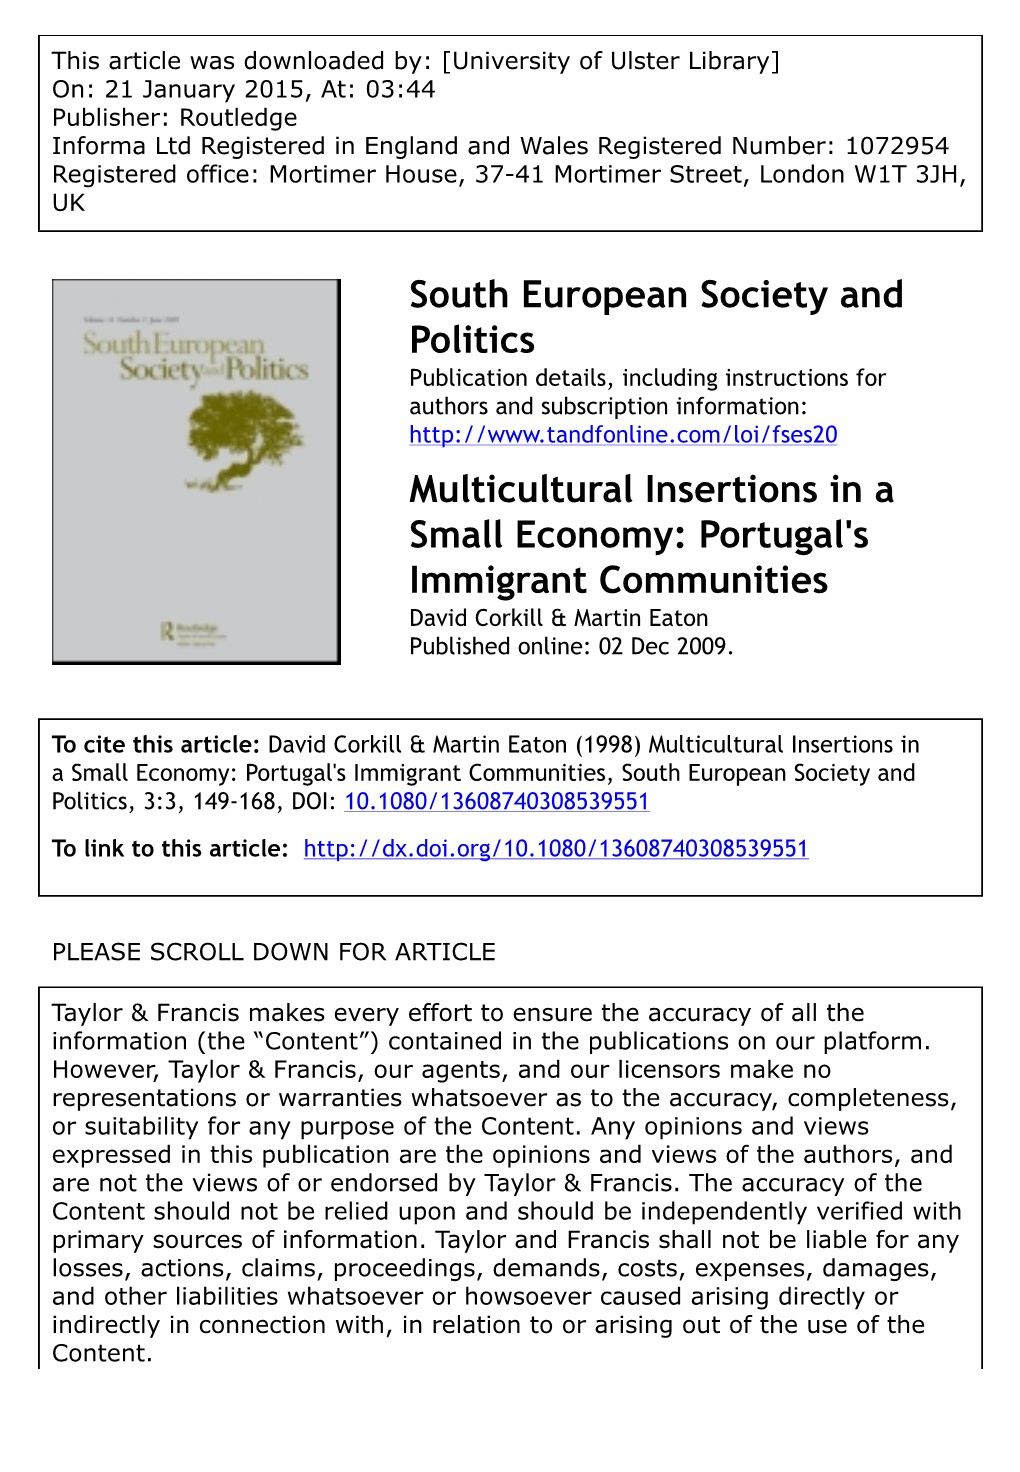 South European Society and Politics Multicultural Insertions in a Small Economy: Portugal's Immigrant Communities